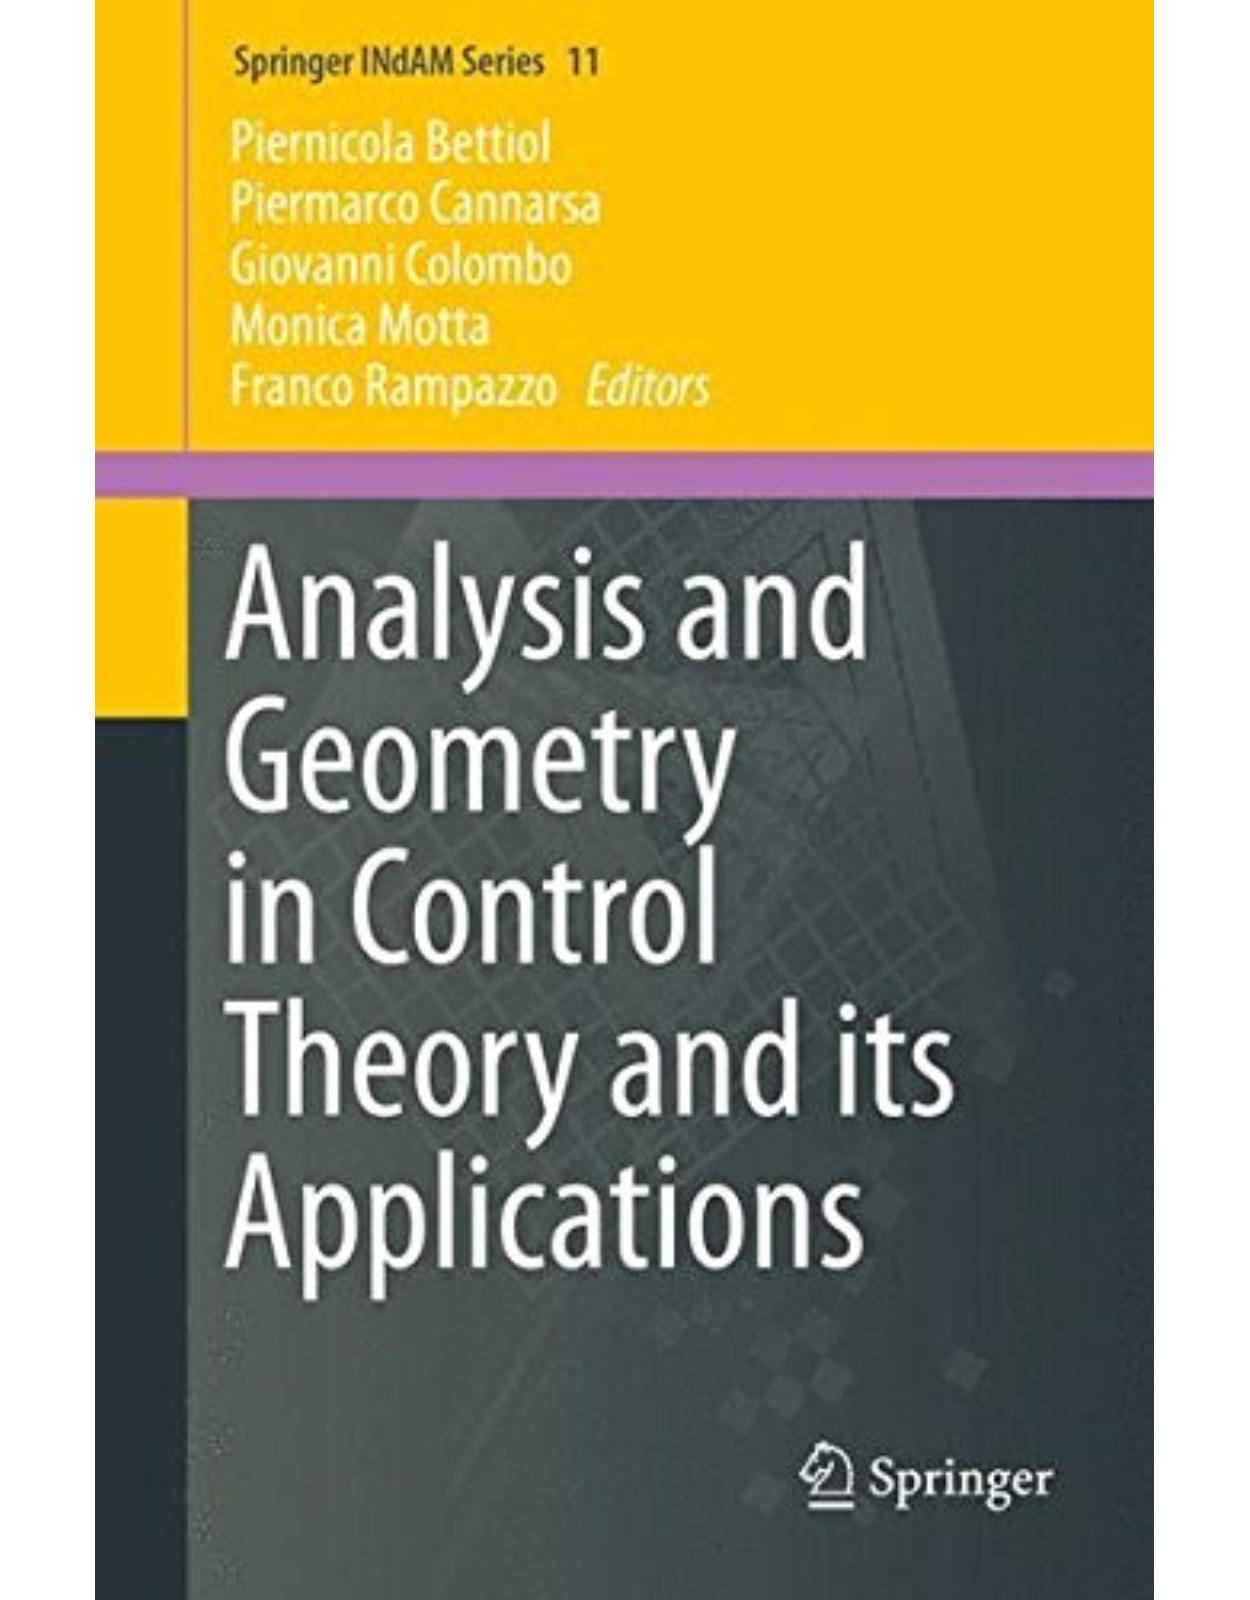 Analysis and Geometry in Control Theory and its Applications